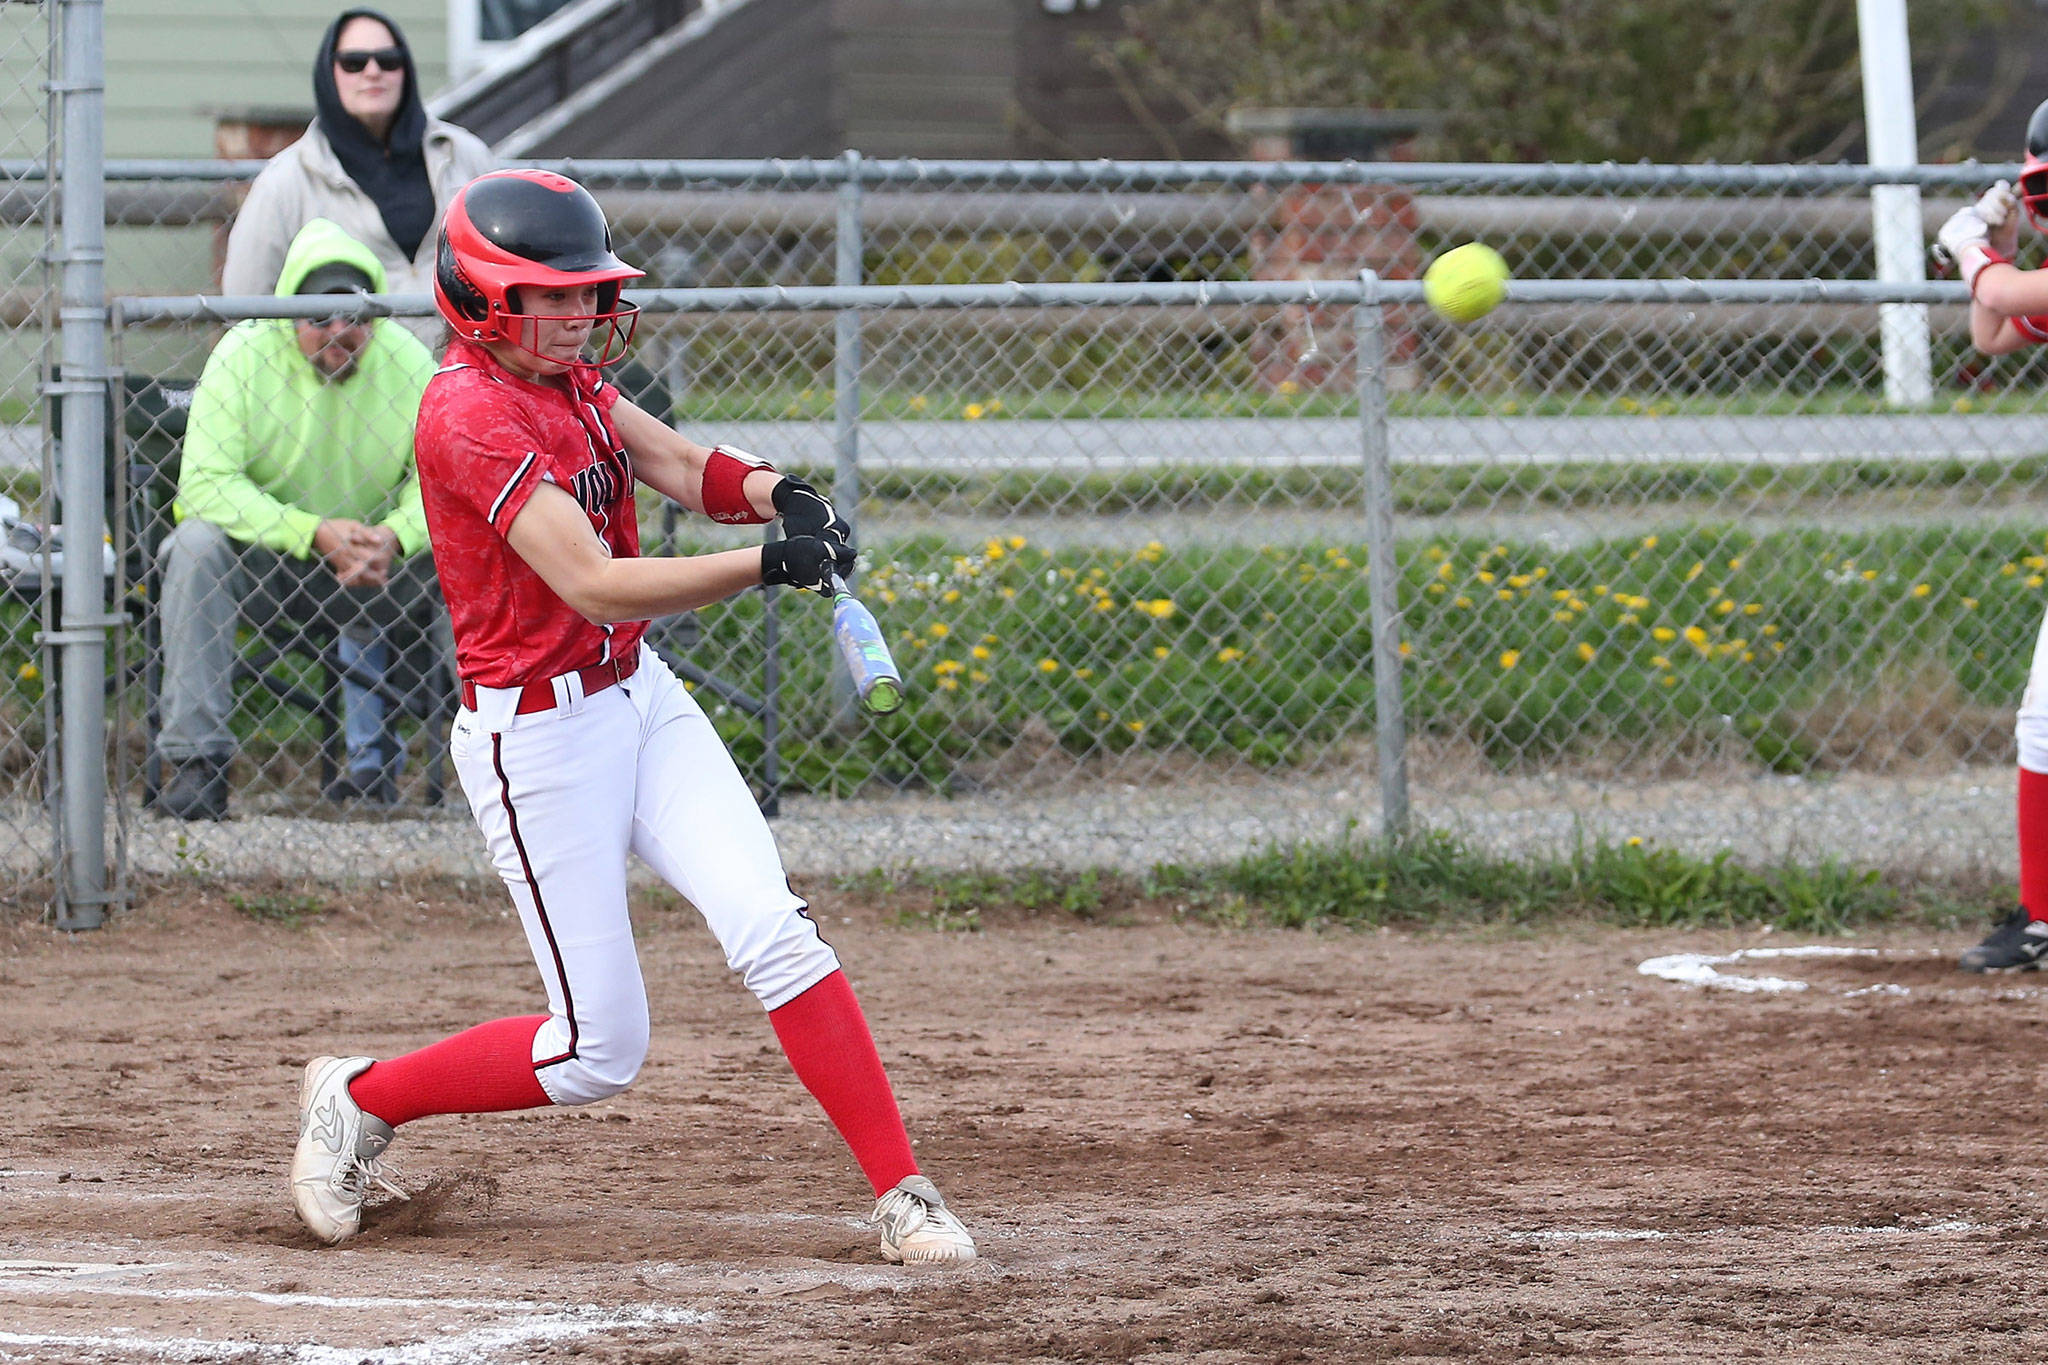 Coupeville’s Scout Smith smashes the ball in the win over Cedar Park Christian Monday.(Photo by John Fisken)